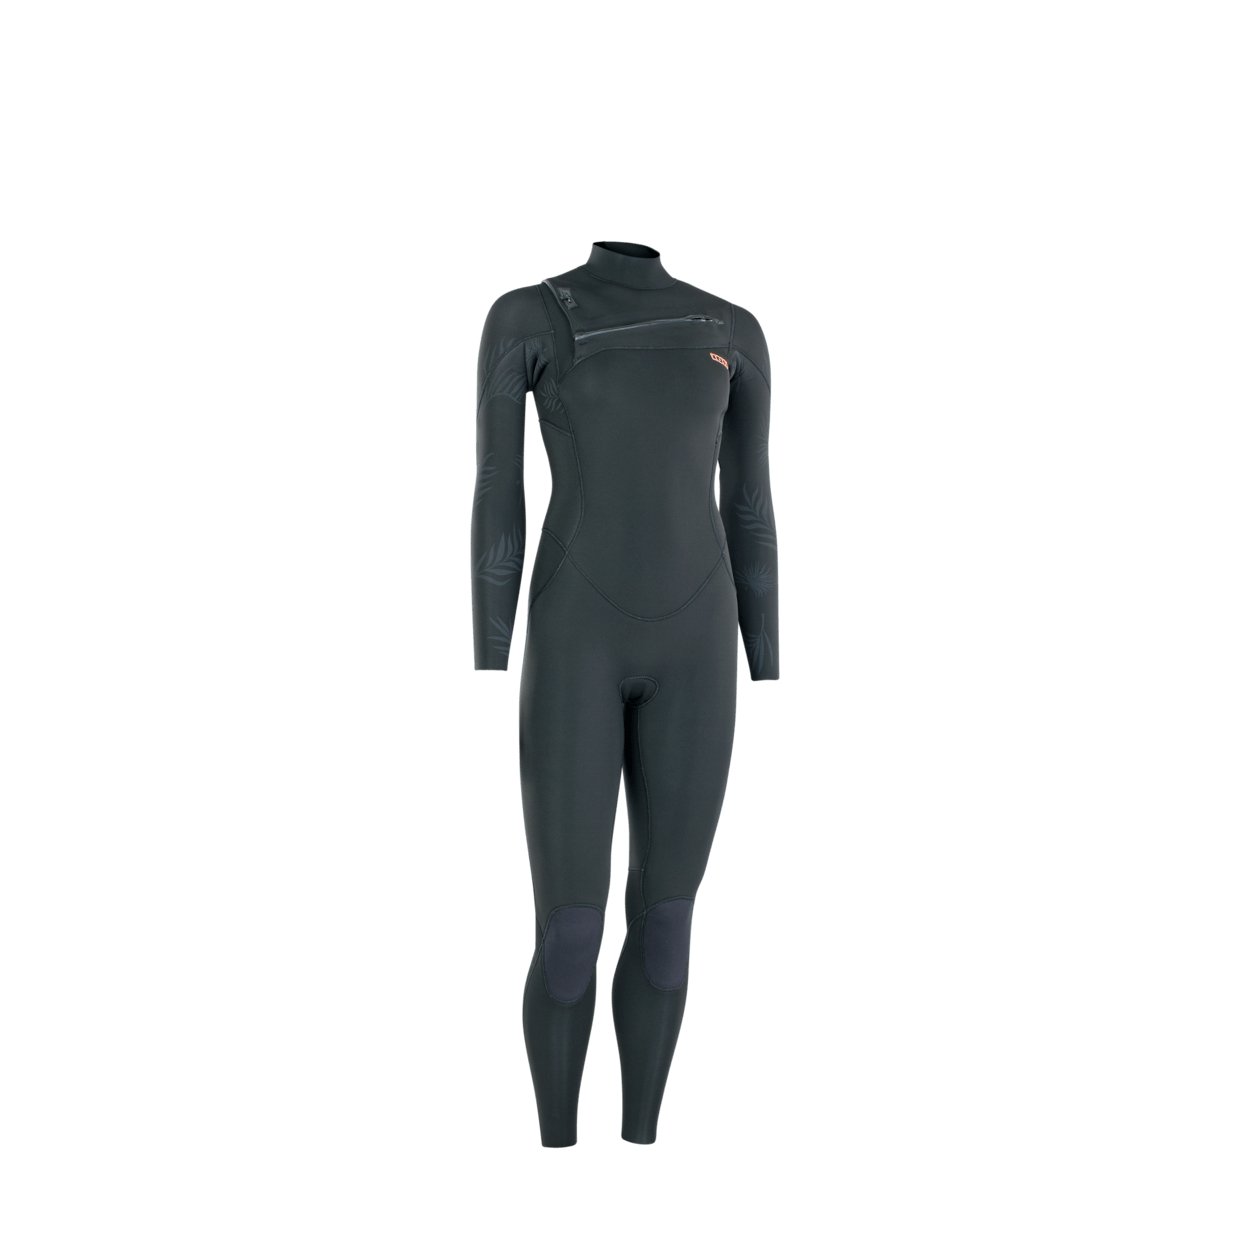 ION Women Wetsuit Amaze Core 4/3 Front Zip 2022 - Worthing Watersports - 9010583058023 - Wetsuits - ION Water